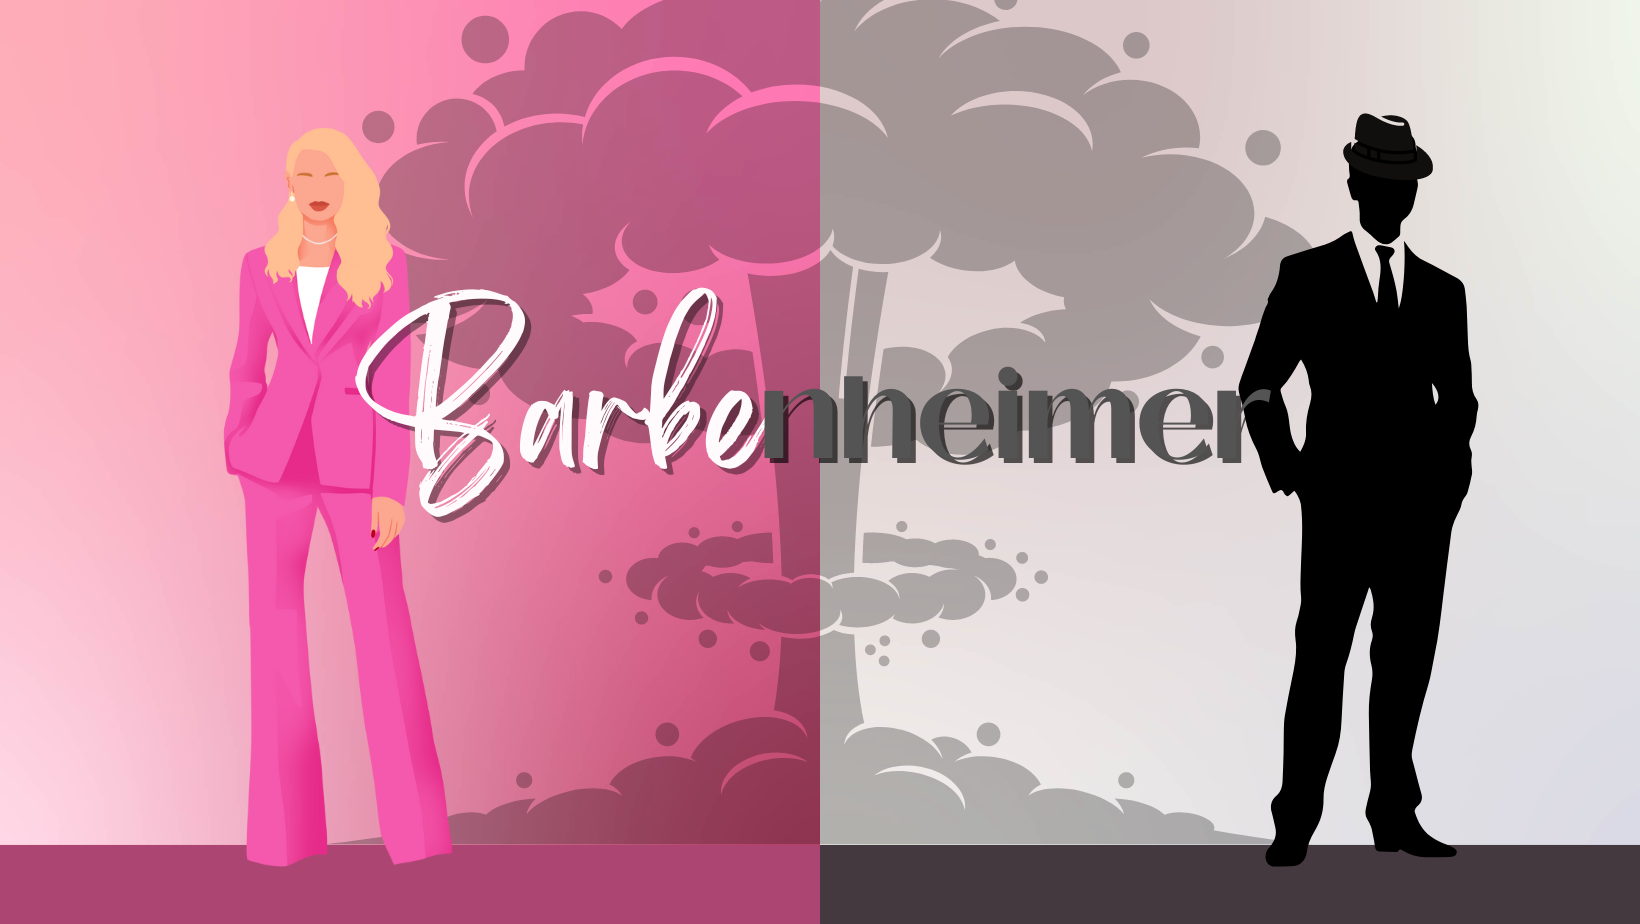 Barbenheimer is the cobined name of Barbie and Oppenheimer, two highly promoted movies that released on the same day in theaters.